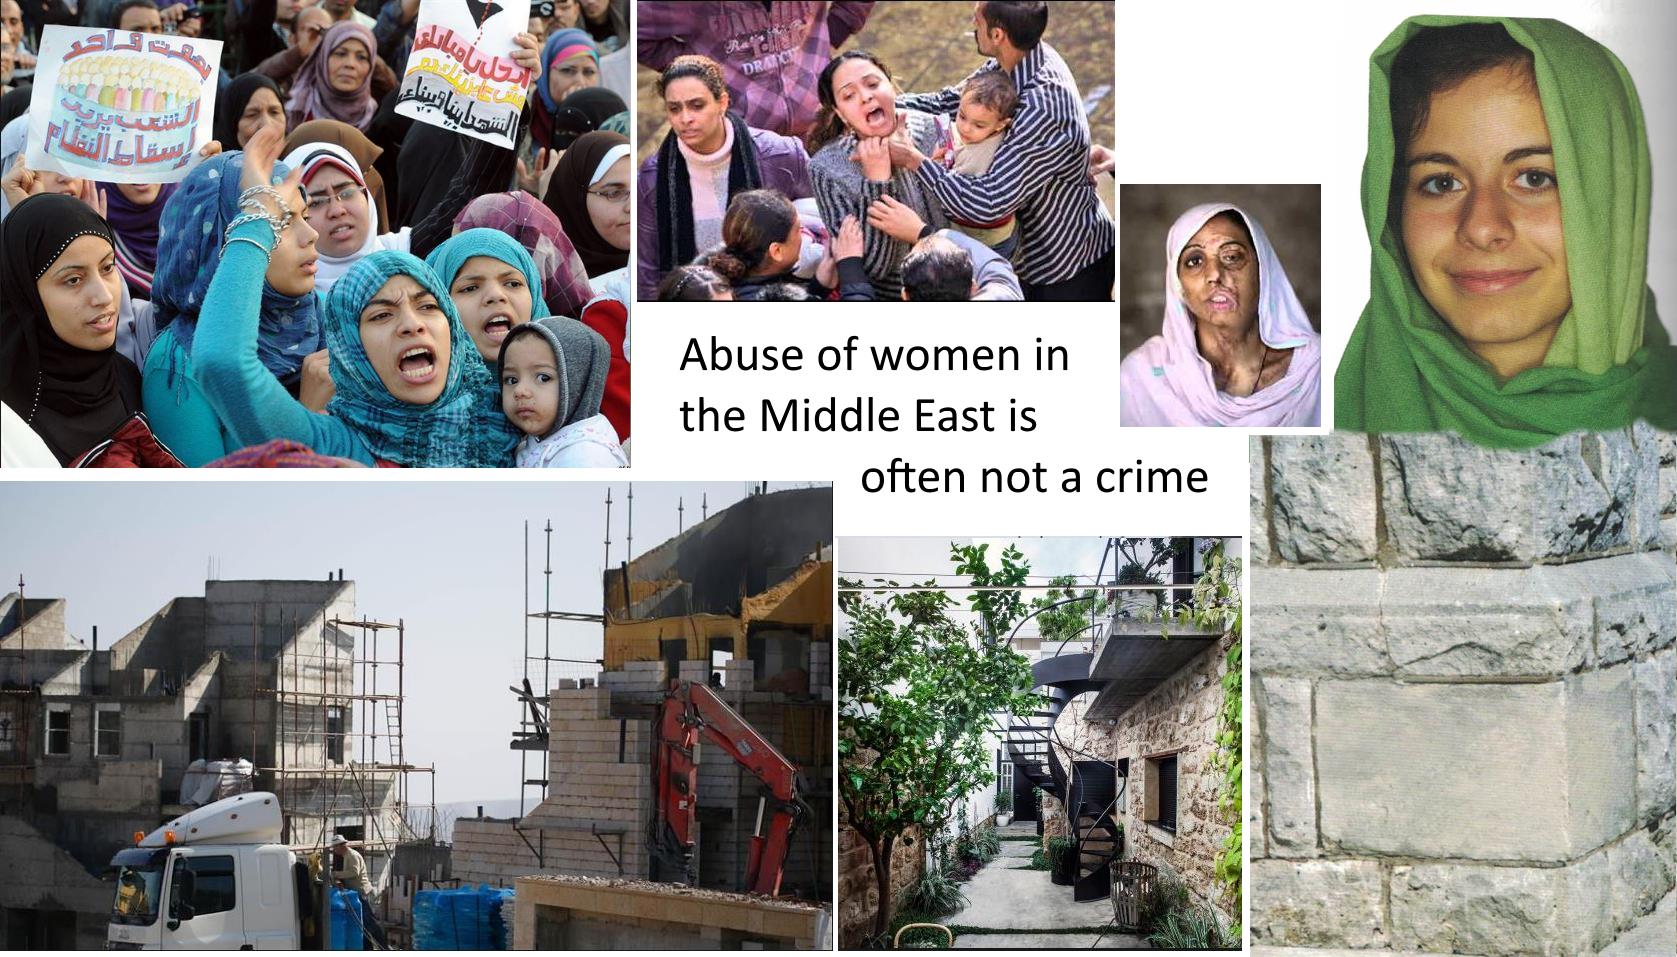 a collage of pictures of middle eastern women protesting, being abused and smiling, of stone homes and a cornerstone